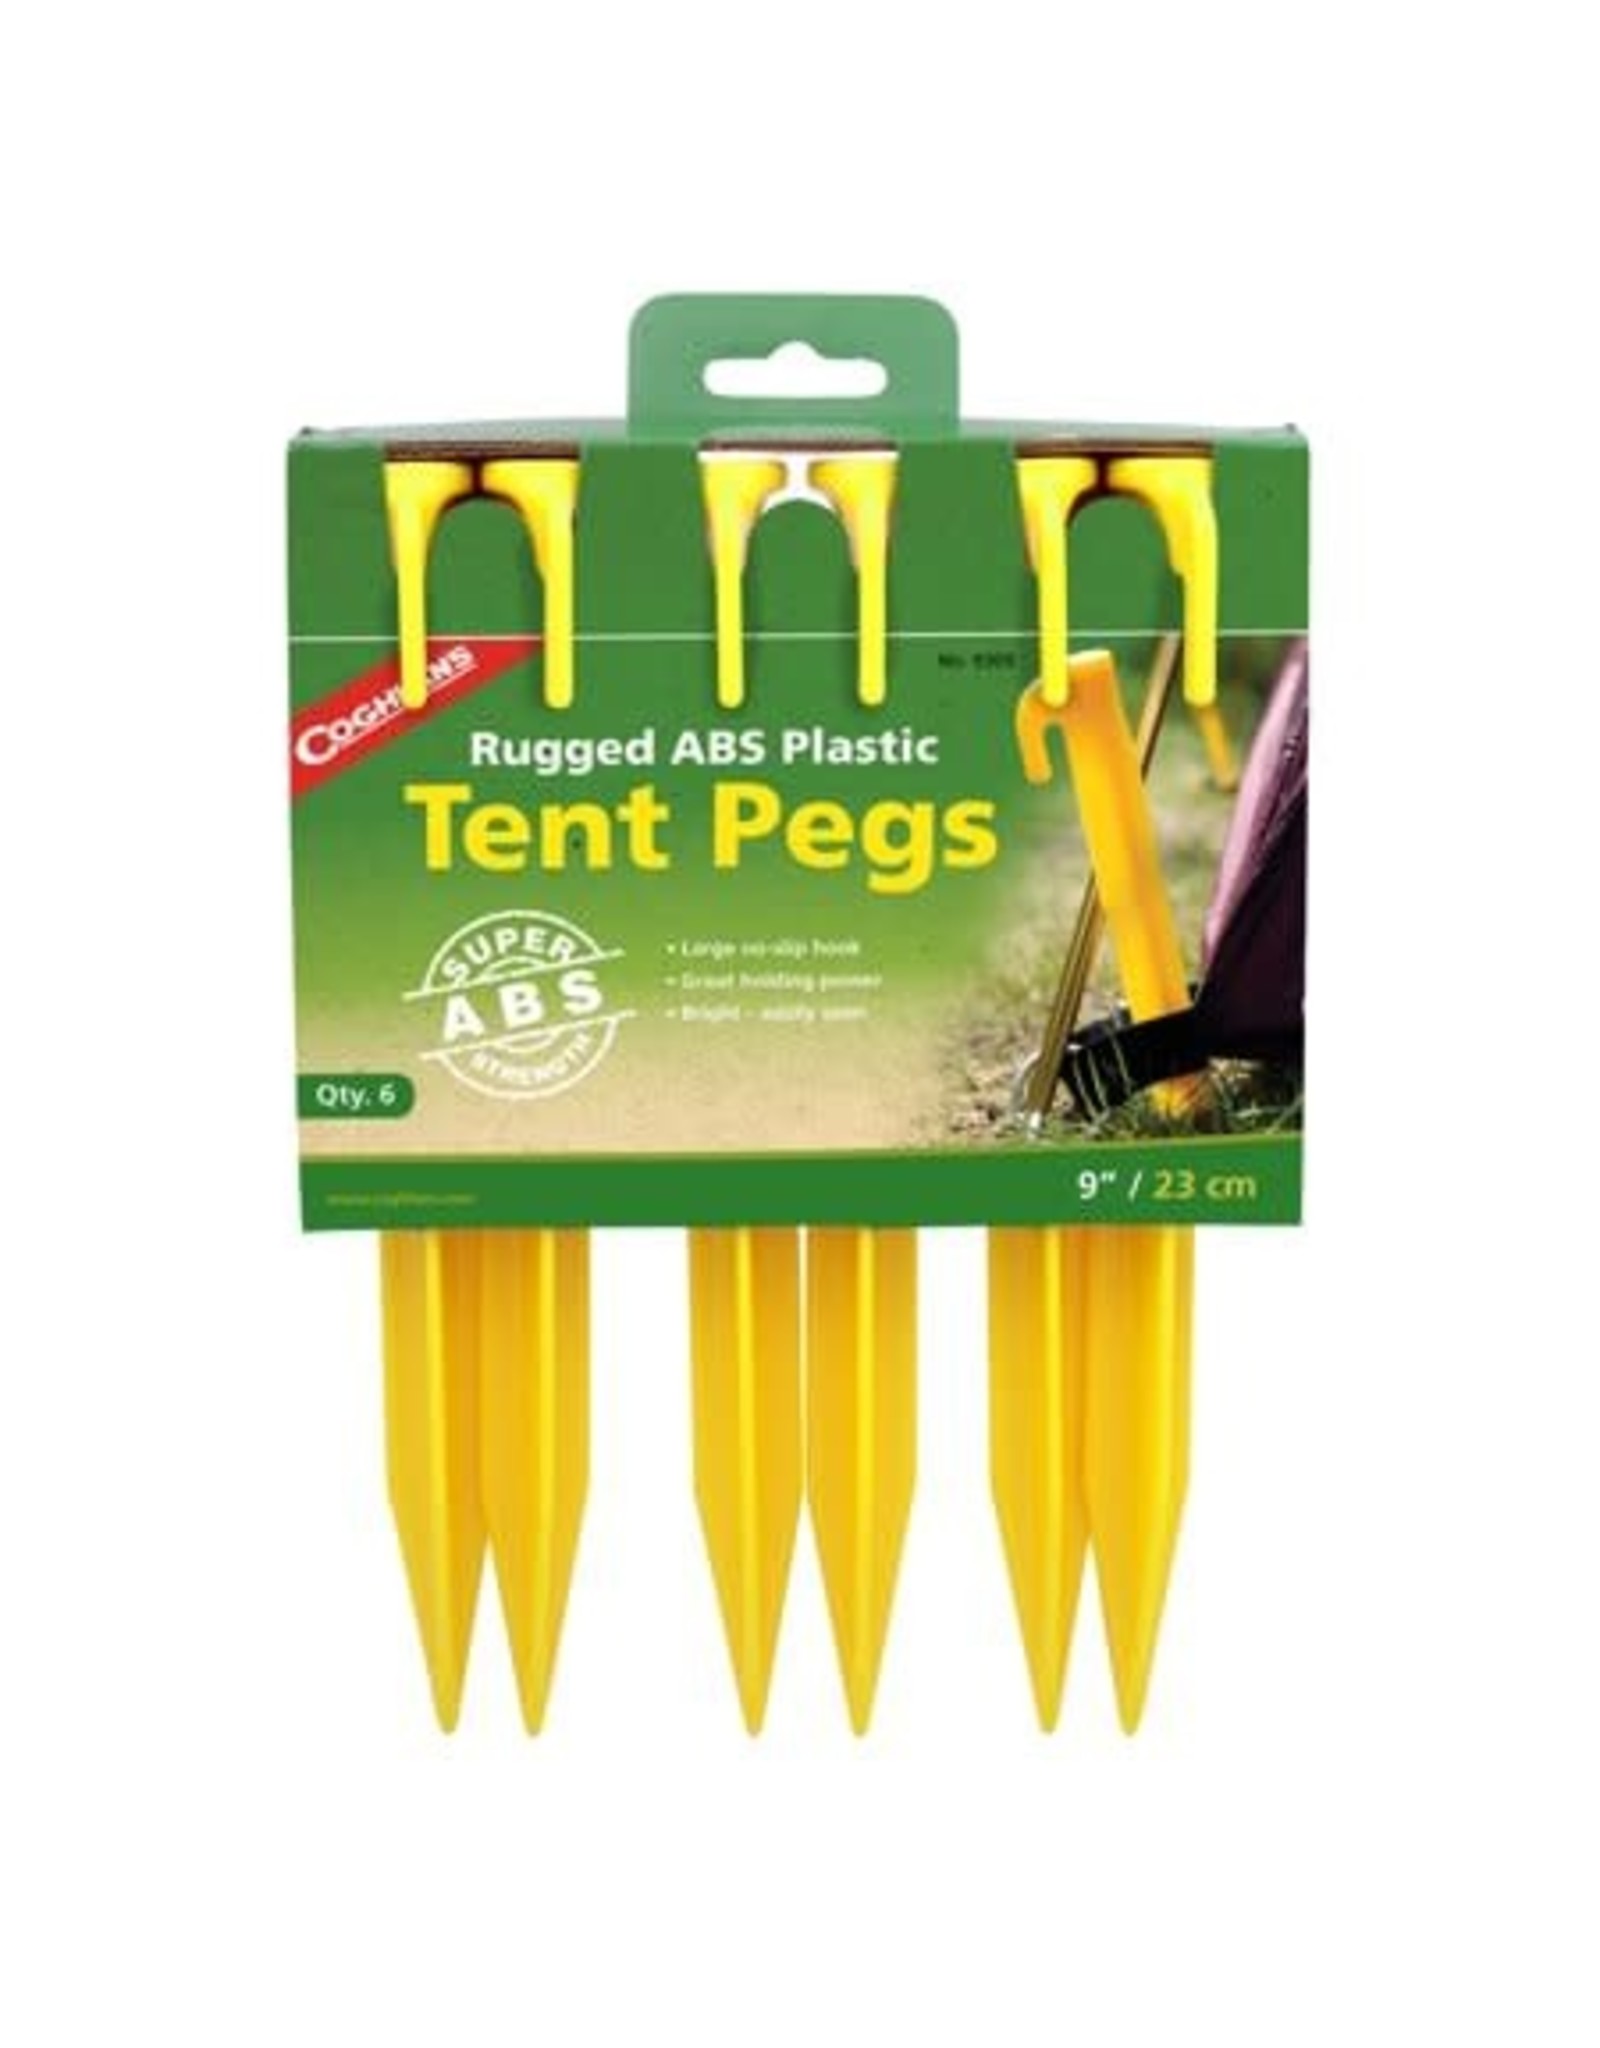 COGHLAN'S COG RUGGED TENT PEGS